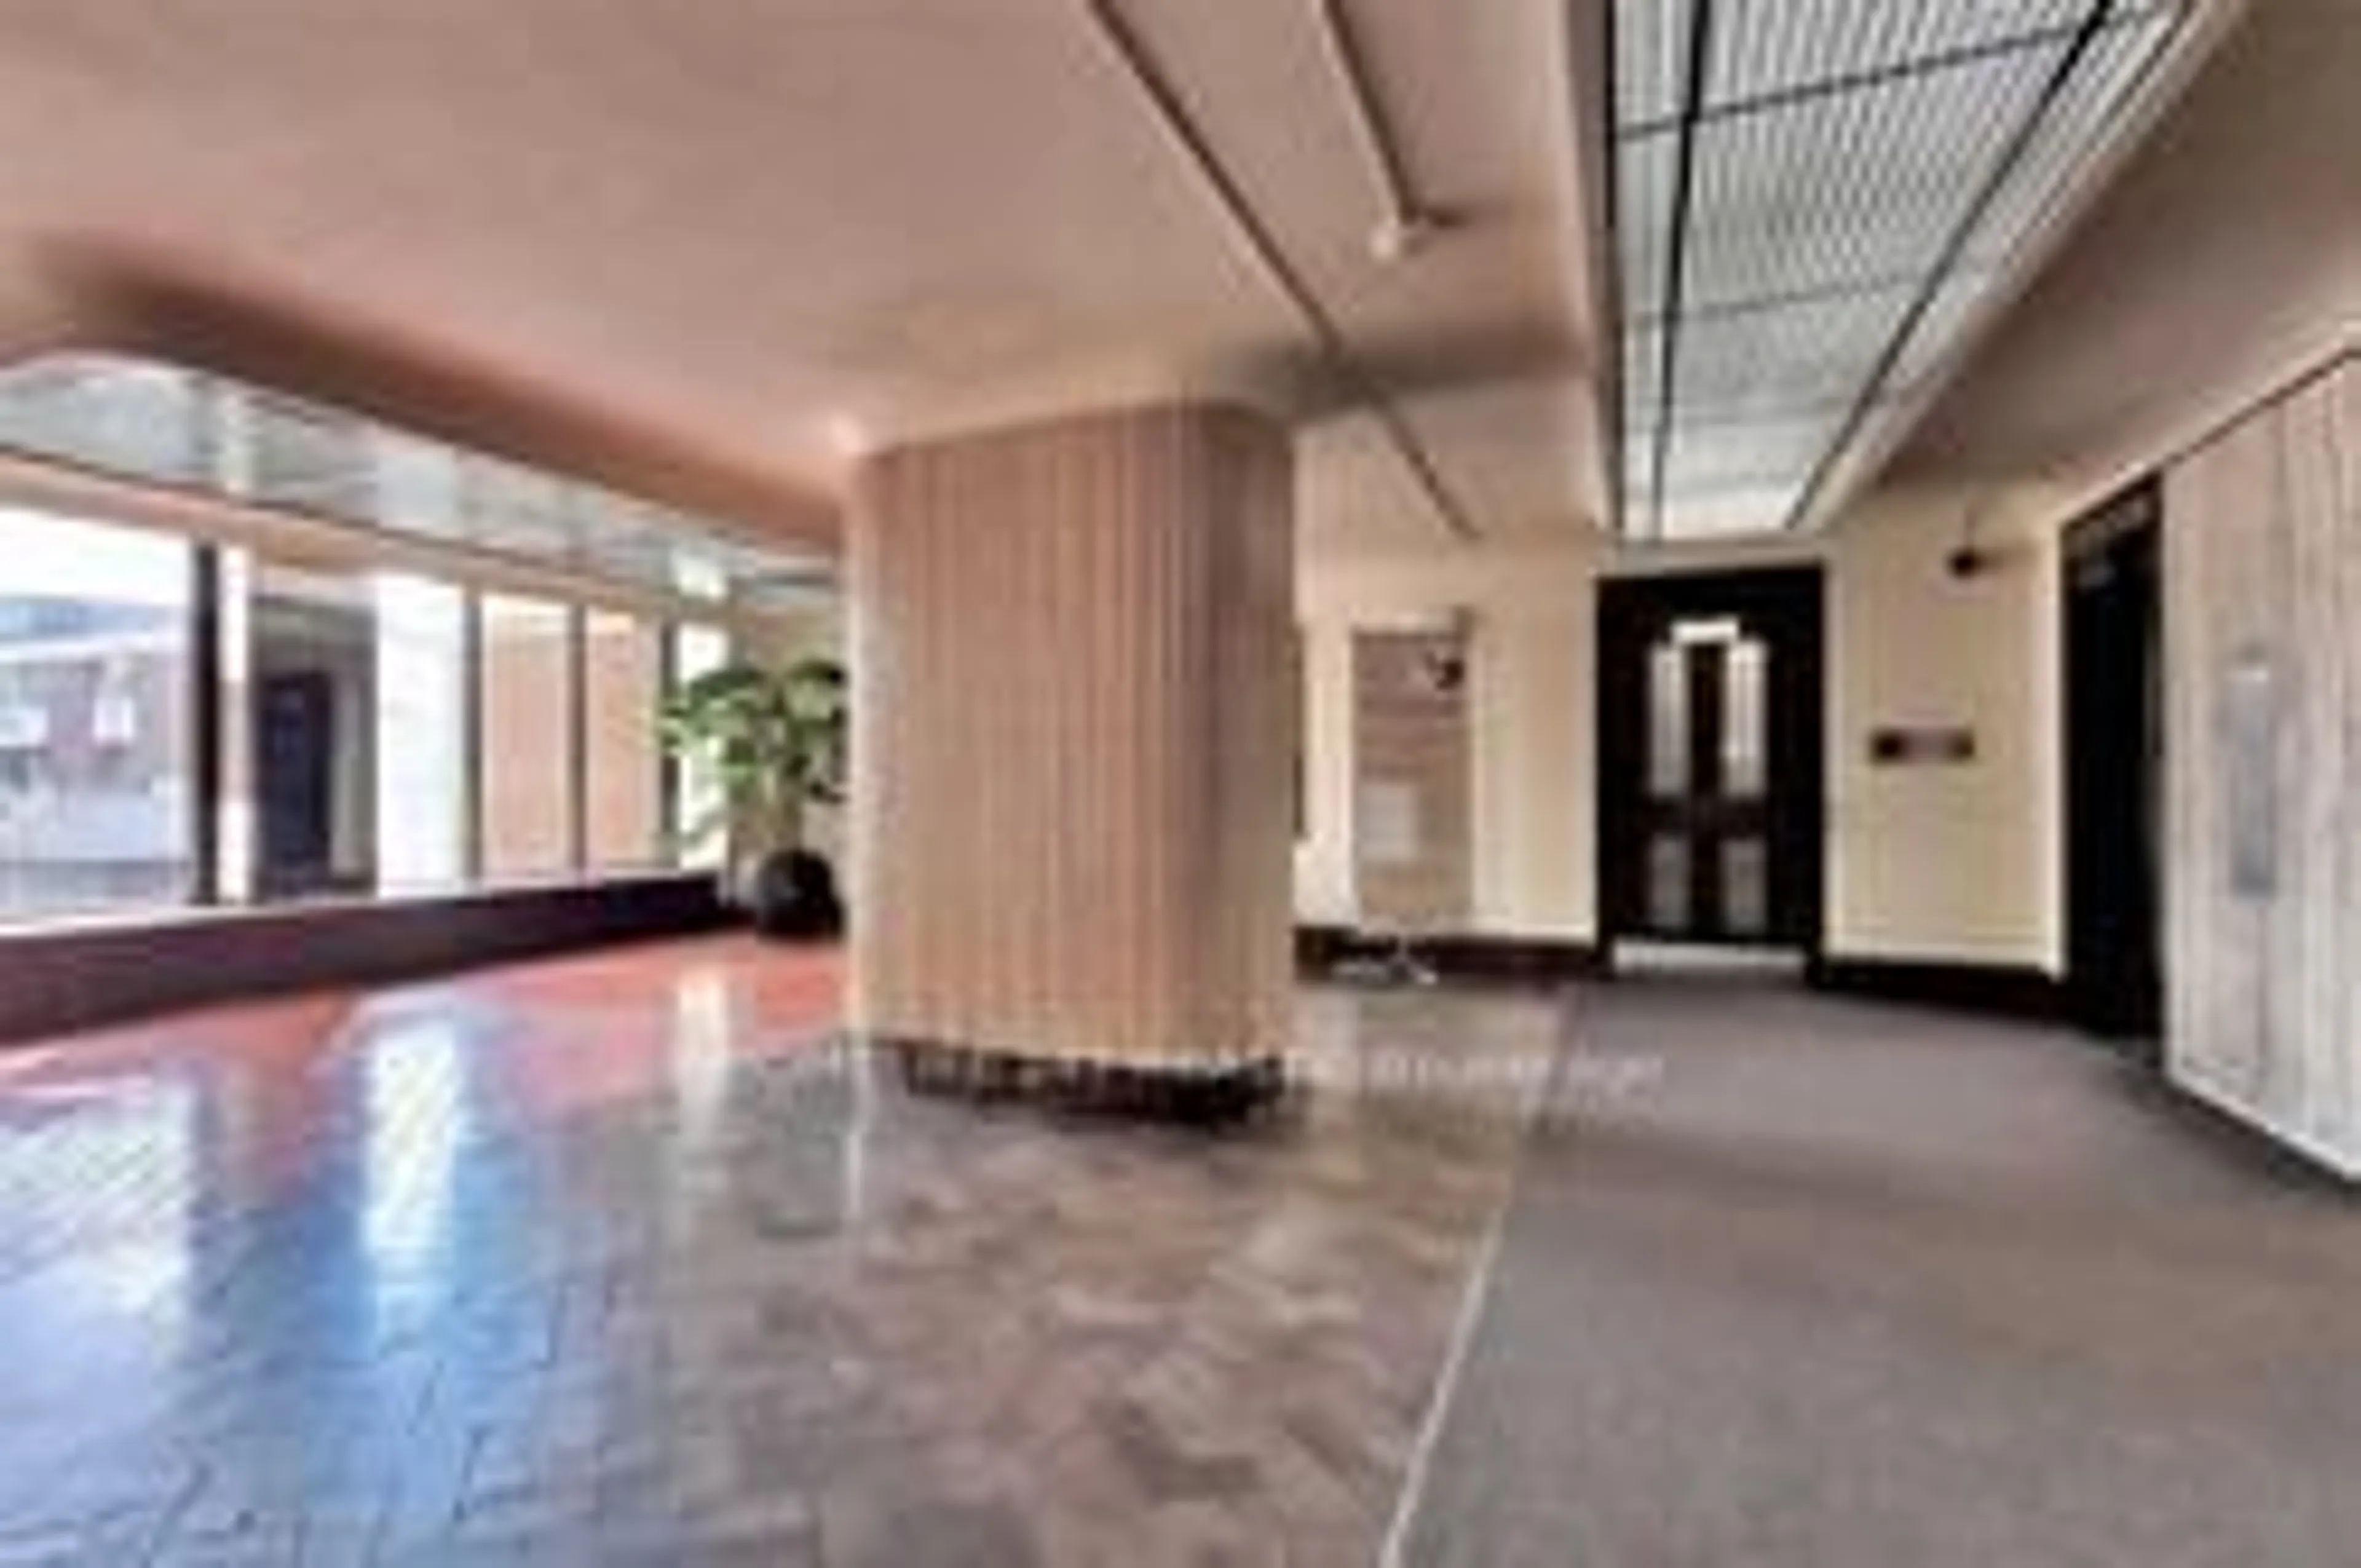 Foyer or entryway or lobby or floor landing area for 1 Massey Sq #508, Toronto Ontario M4C 5L4